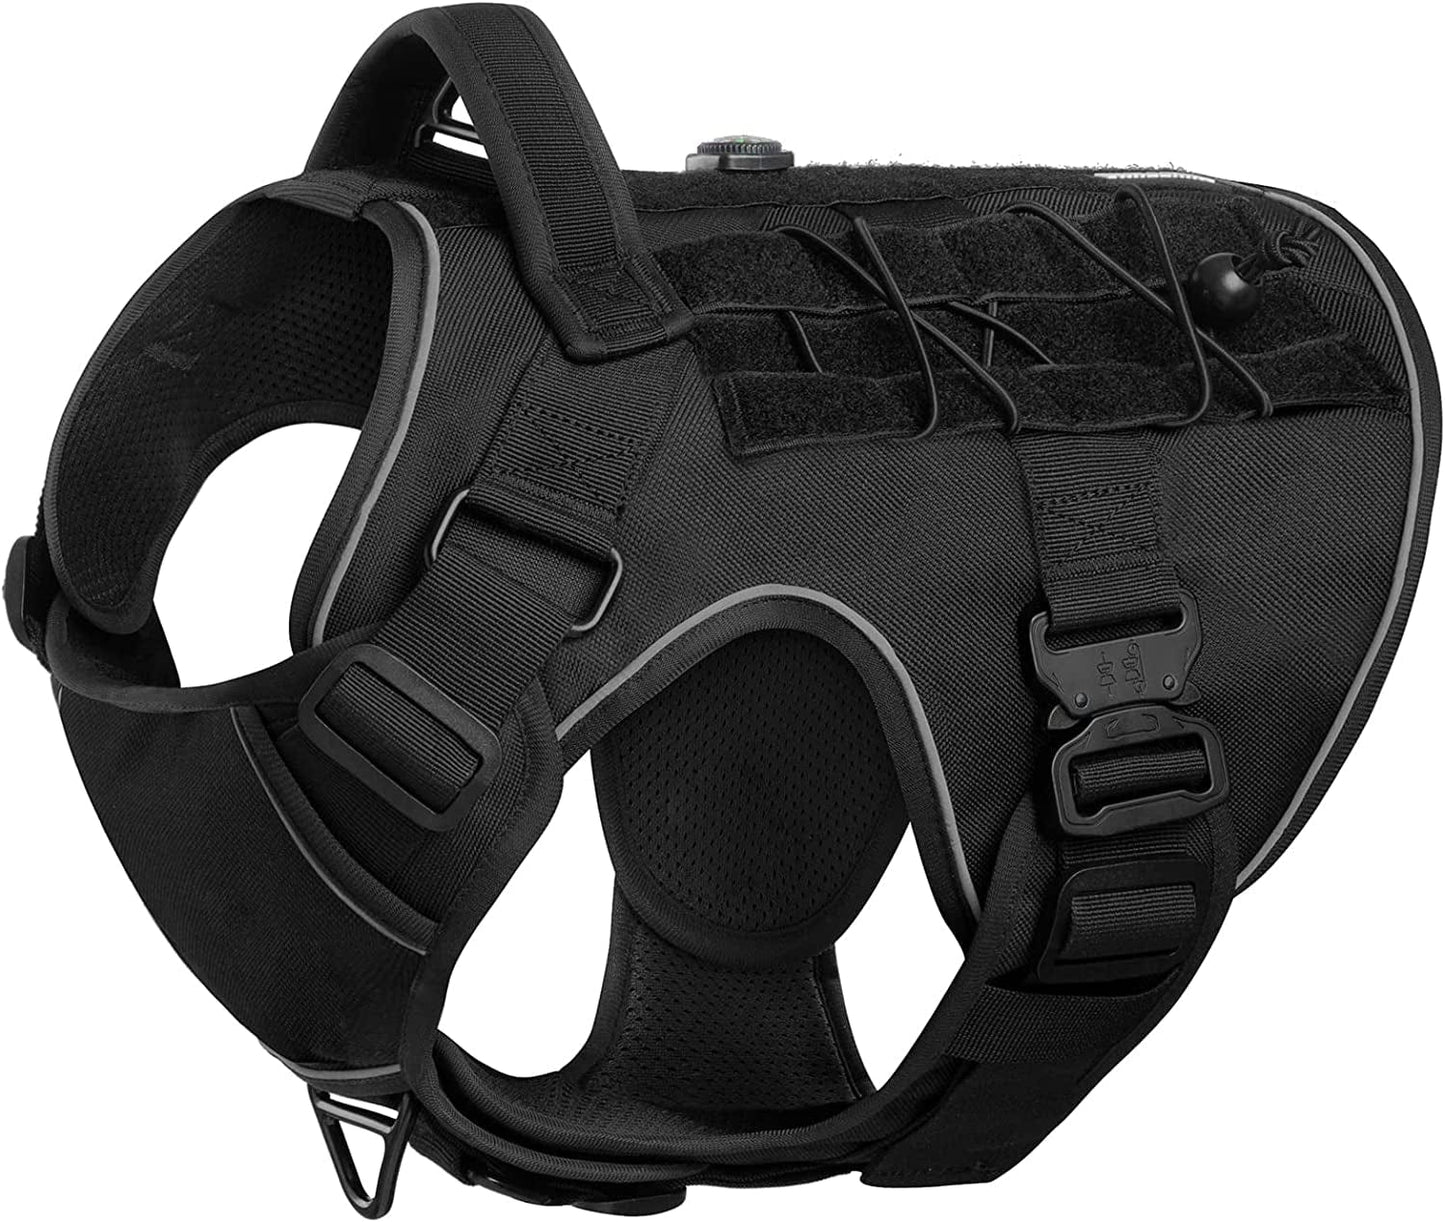 DNALLRINO Tactical Dog Harness for Large Medium Dogs, Heavy Duty Military Dog Harness with Handle, Adjustable No Pull Service Dog Harness with Molle & Loop Panels for Hiking Walking Training Animals & Pet Supplies > Pet Supplies > Dog Supplies > Dog Apparel Dnallrino Black Classic L (Neck: 19" - 27", Chest: 28.5"-37") 